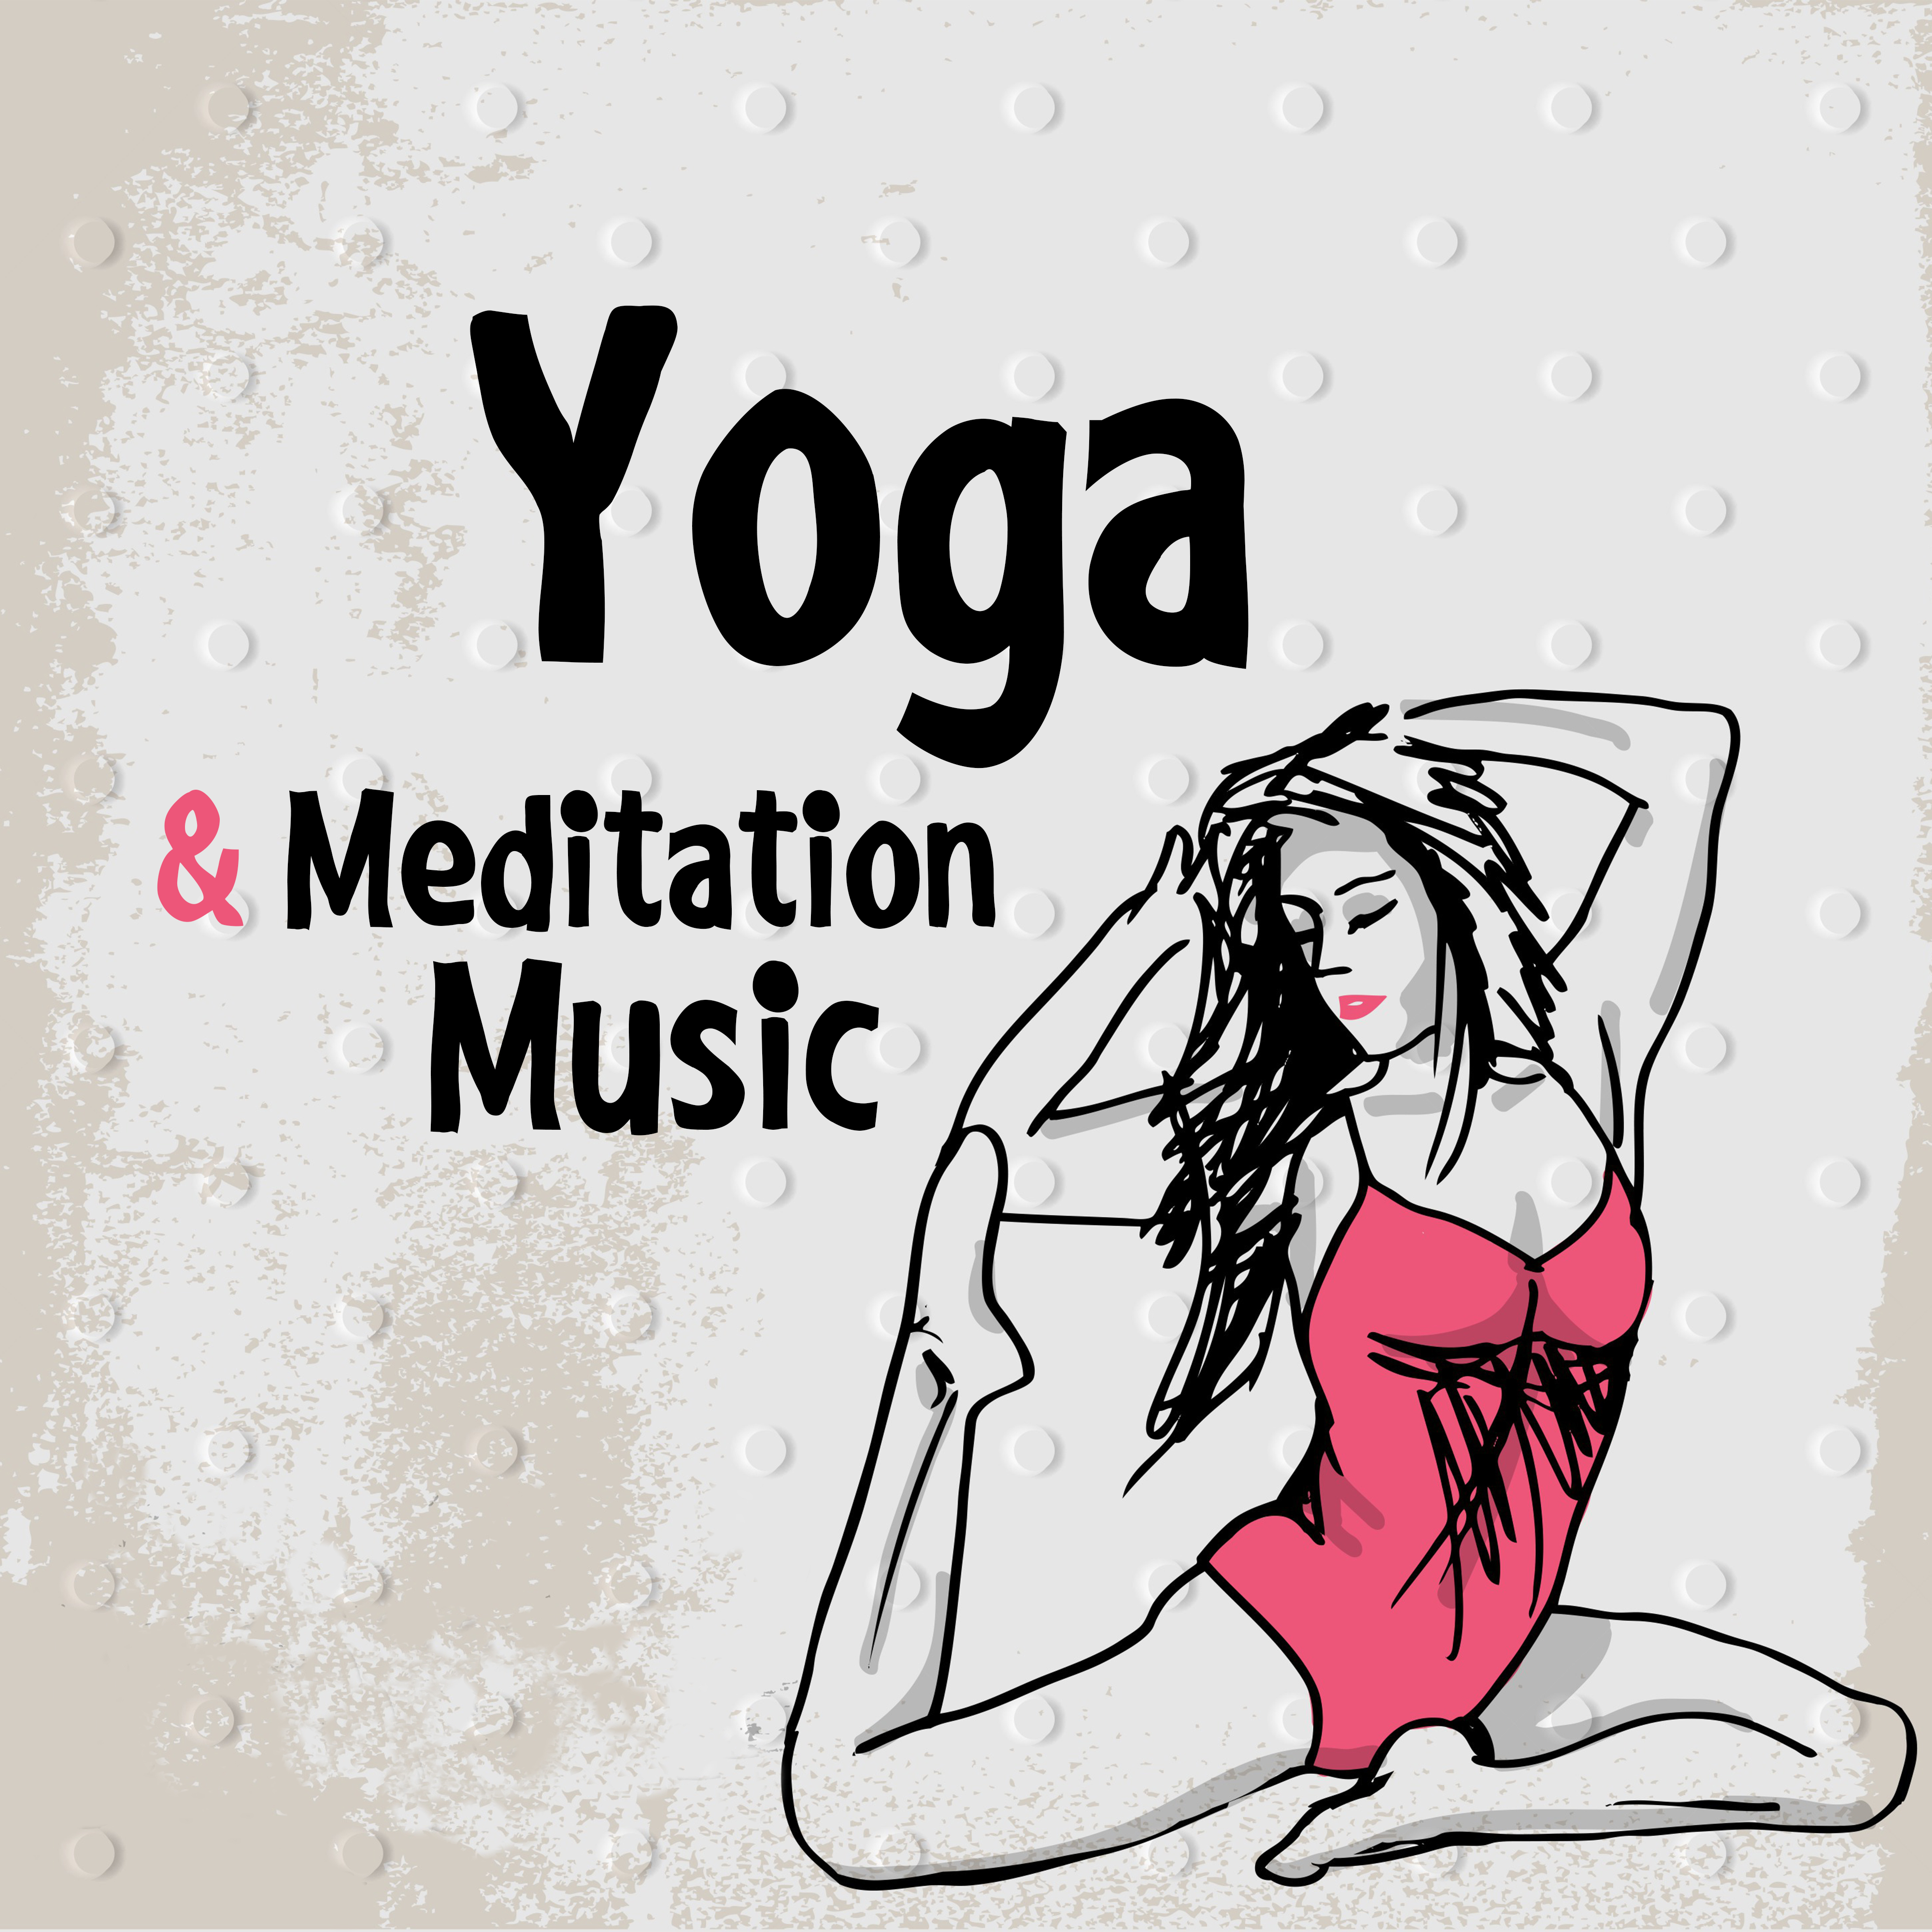 Yoga & Meditation Music – Rest with New Age, Peaceful Music to Meditate, Buddha Relaxation